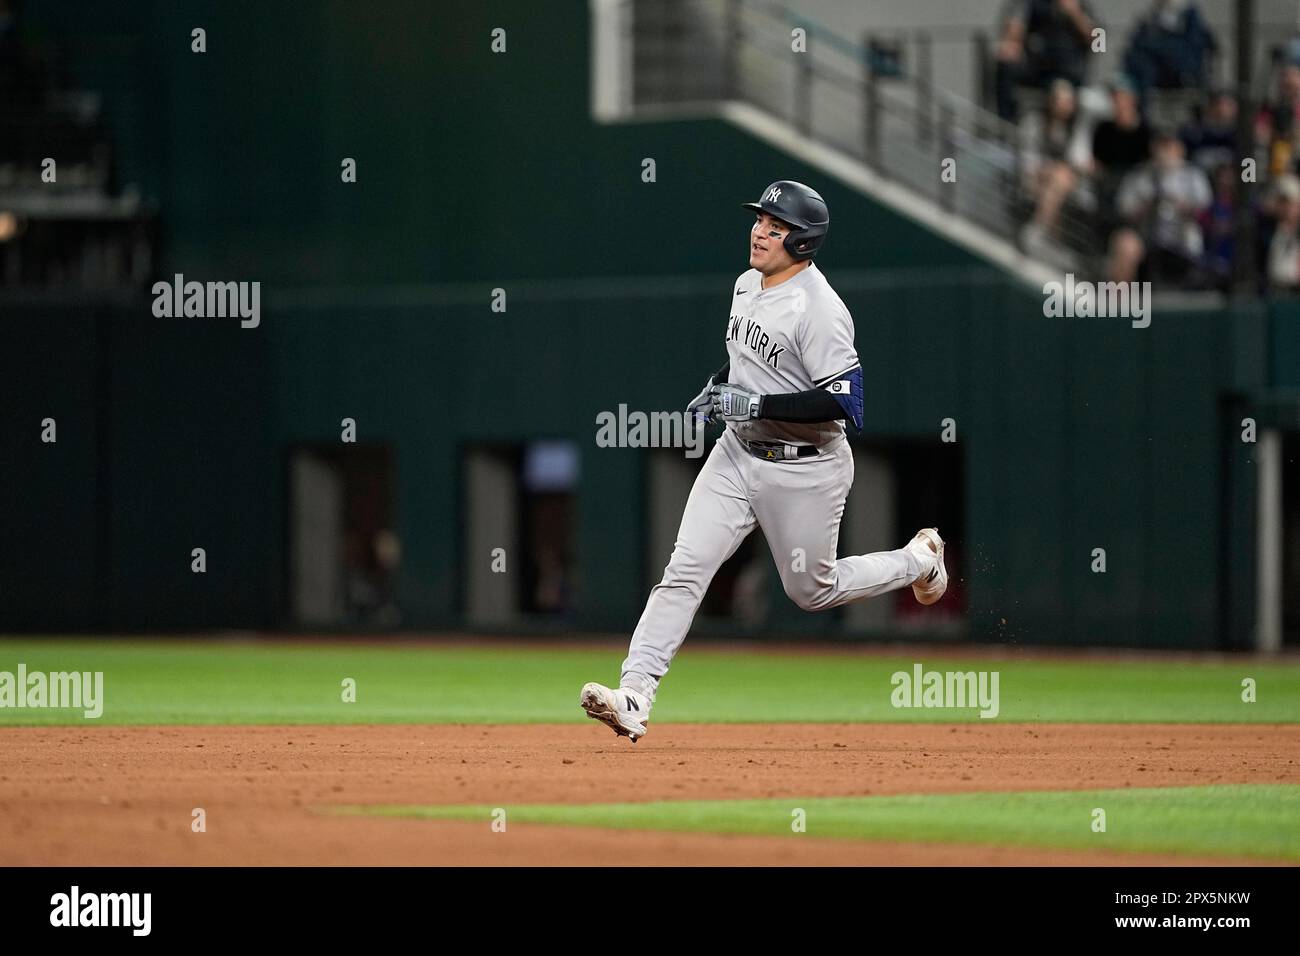 New York Yankees' Jose Trevino rounds the bases after hitting a